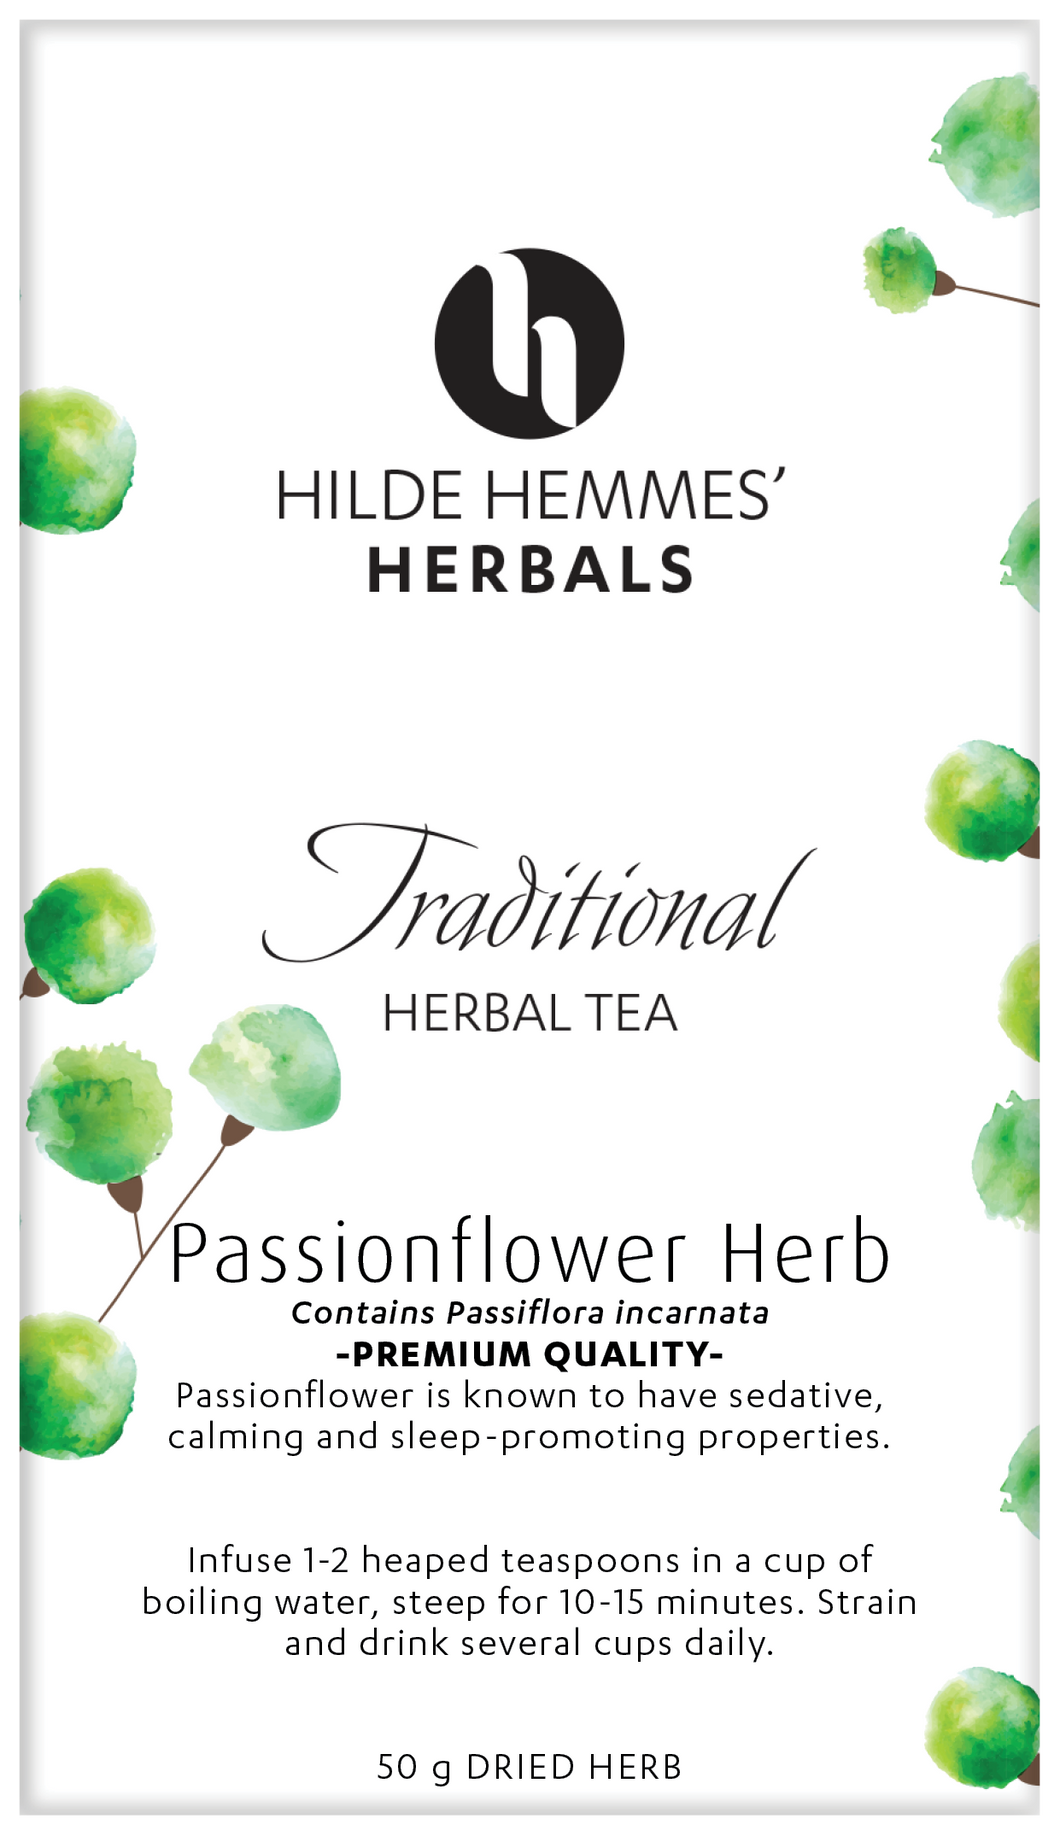 Hilde Hemme's Passionflower Herb 50g